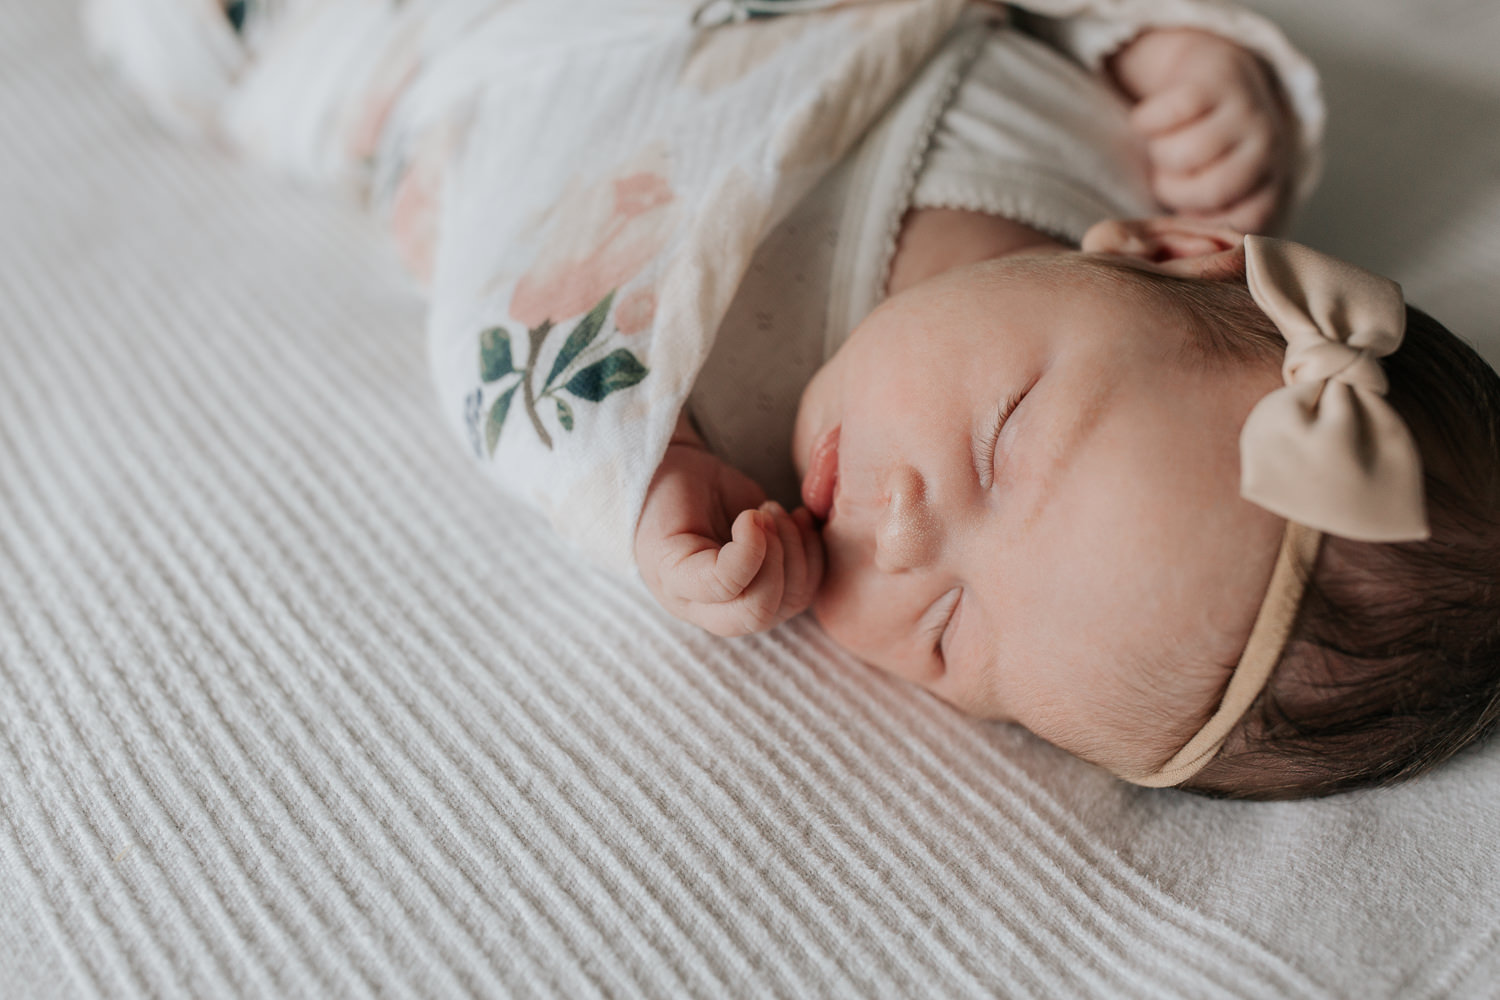 2 week old baby girl with dark hair wrapped in swaddle with soft pink flowers, wearing bow headband asleep on bed, hands near face - York Region Lifestyle Photography